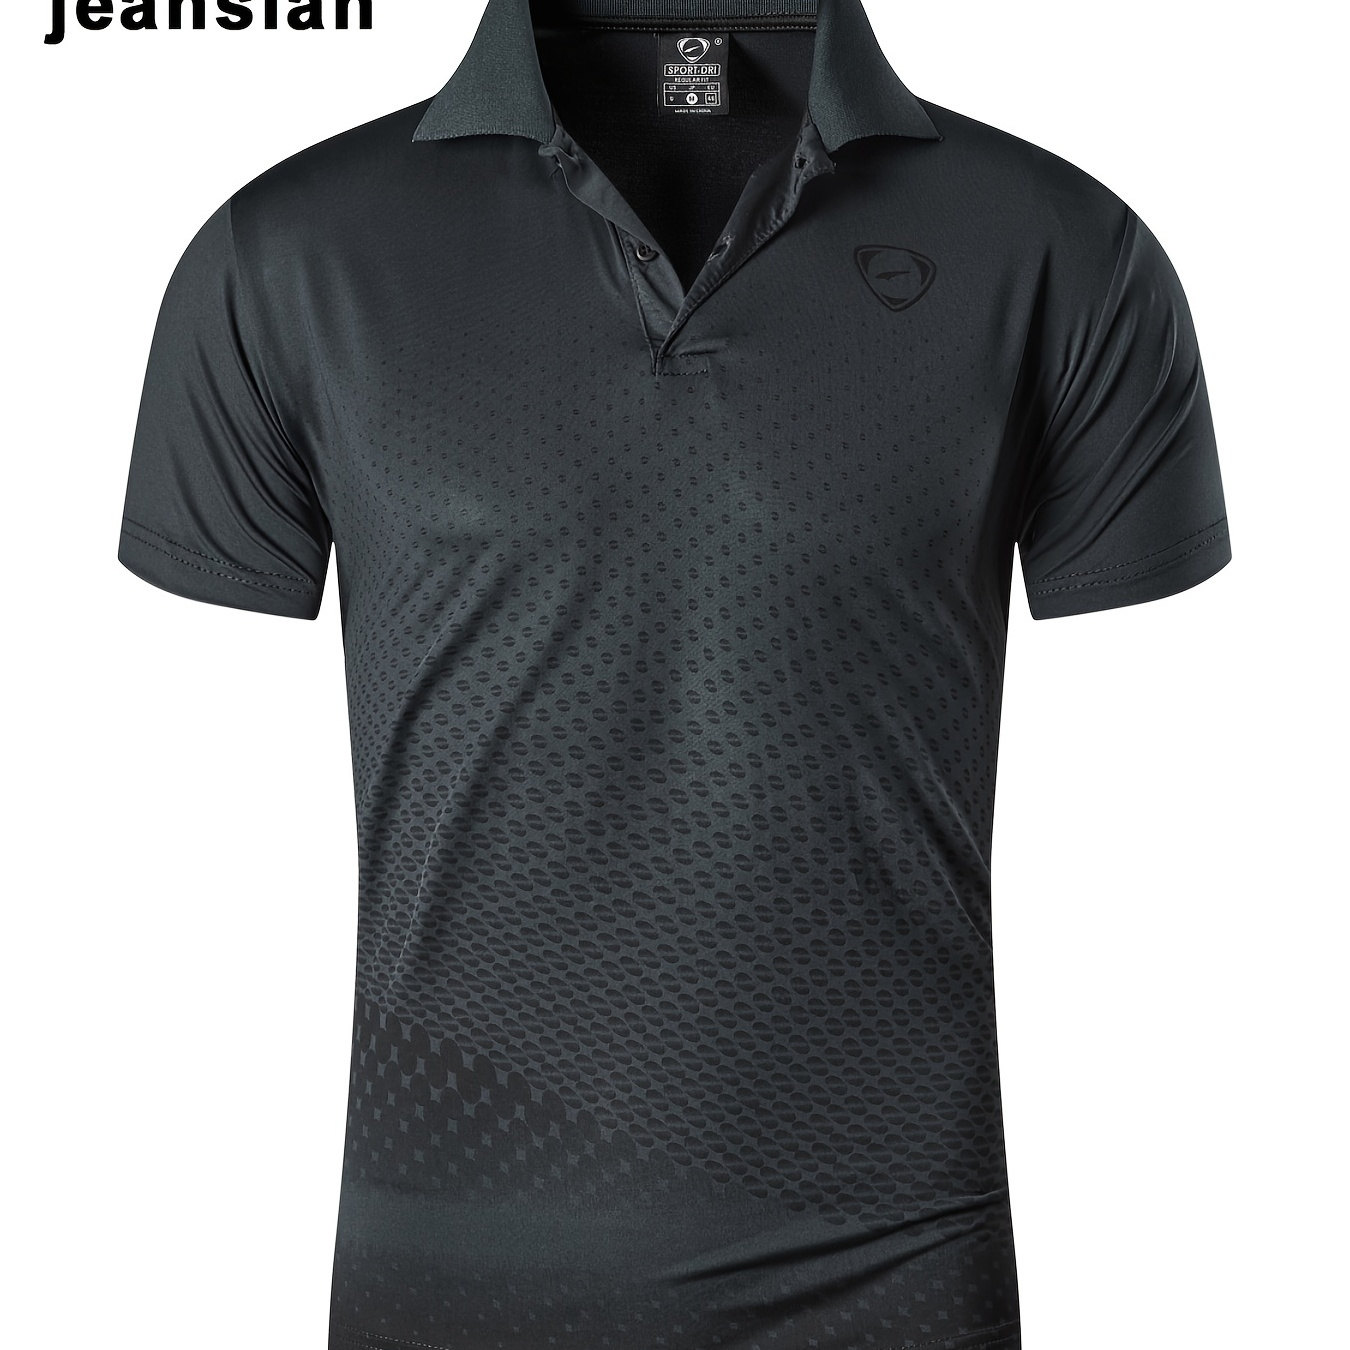 Men's Tops Shirt From Jeansian: Perfect For Tennis, Golf, And Bowling!